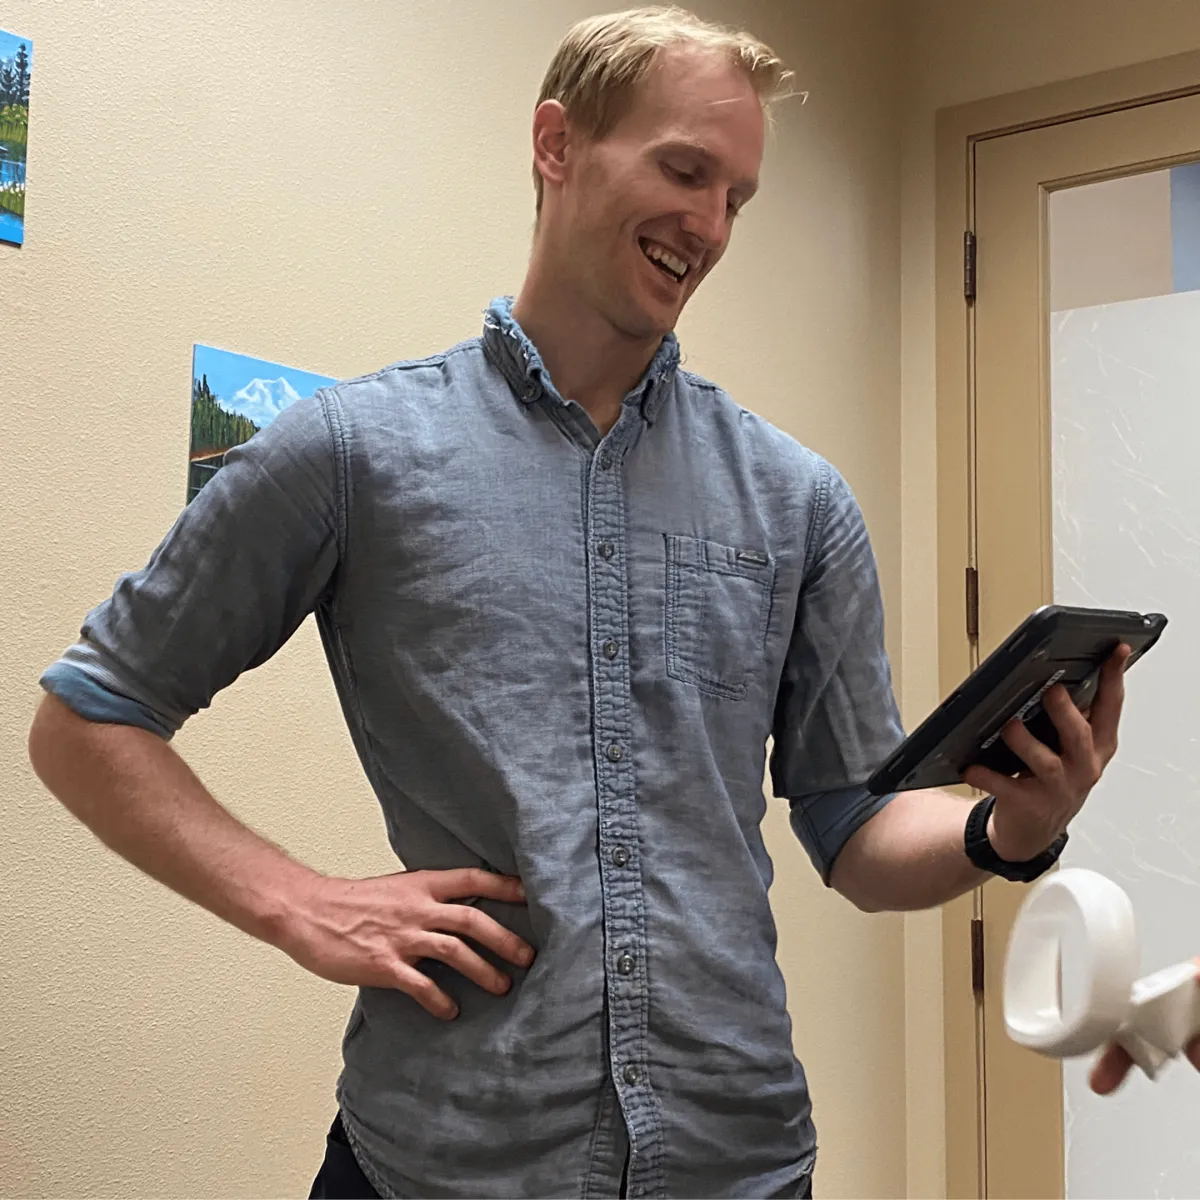 A PhysioFIT therapist smiles as he monitors a patient's progress on a tablet, ensuring a personalized and effective virtual reality therapy session.